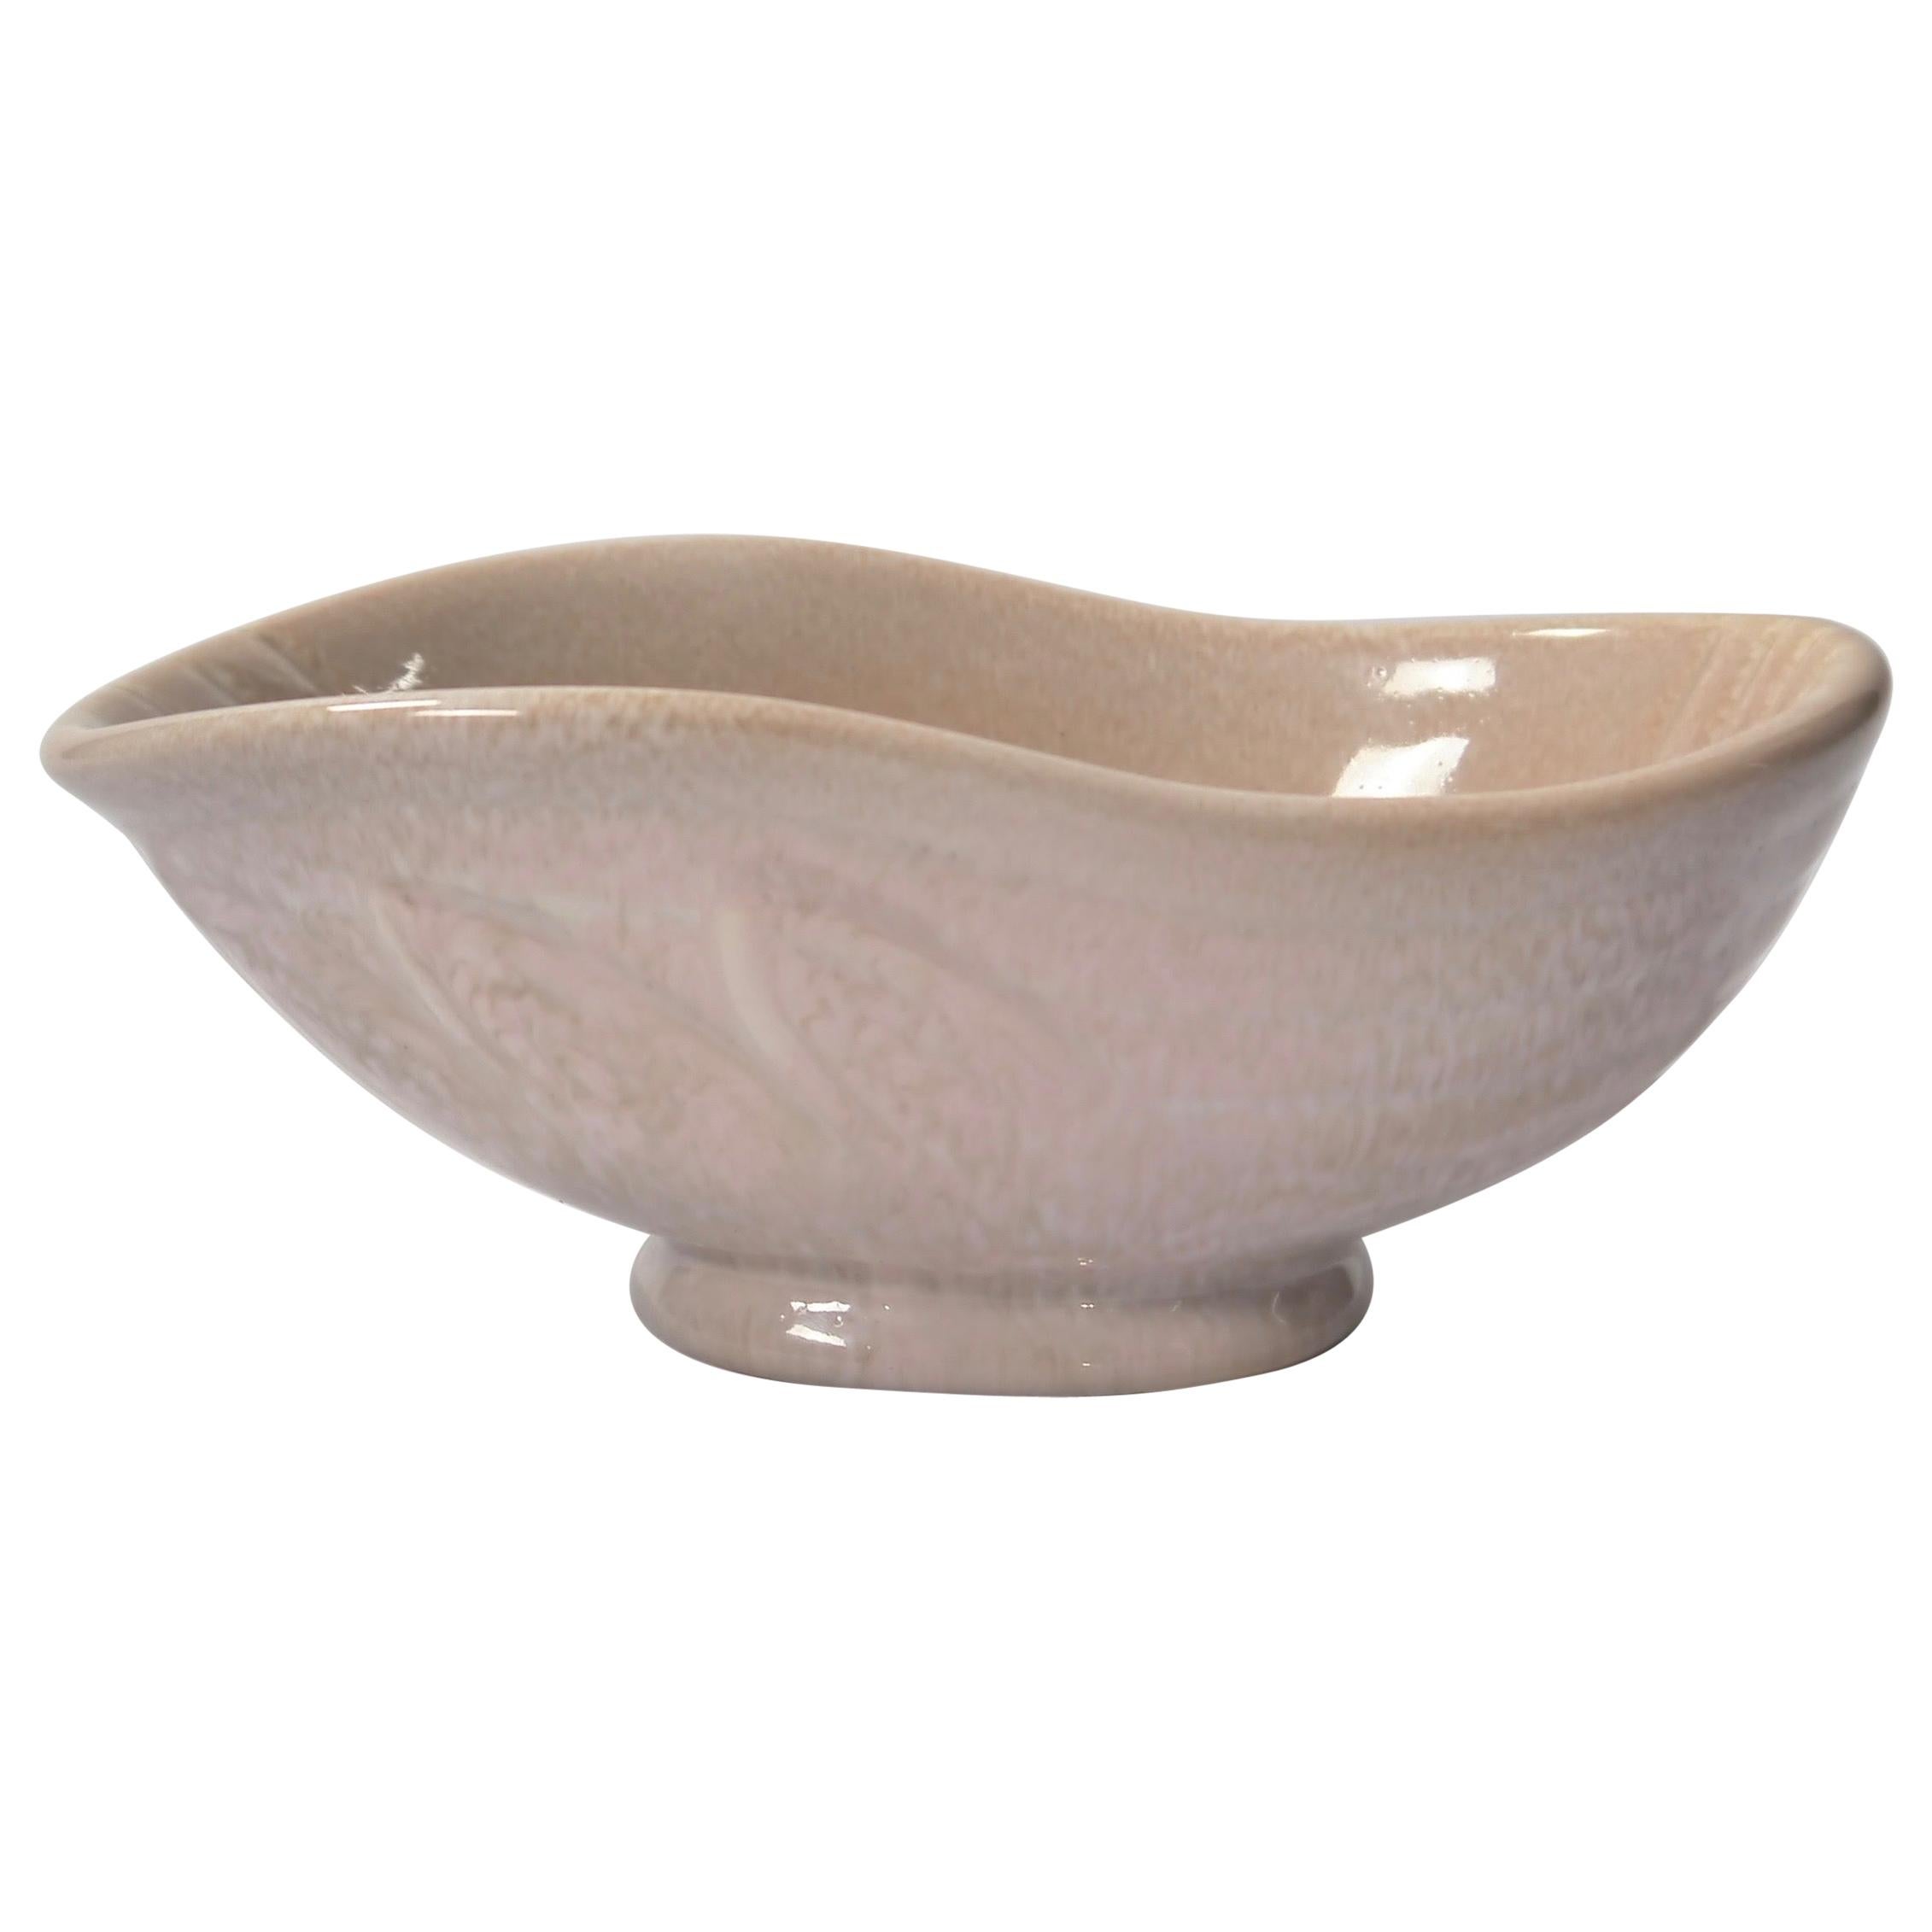 Vanilla Colored Ceramic Bowl by Gunnar Nylund for Rörstrand, Sweden, 1930s For Sale